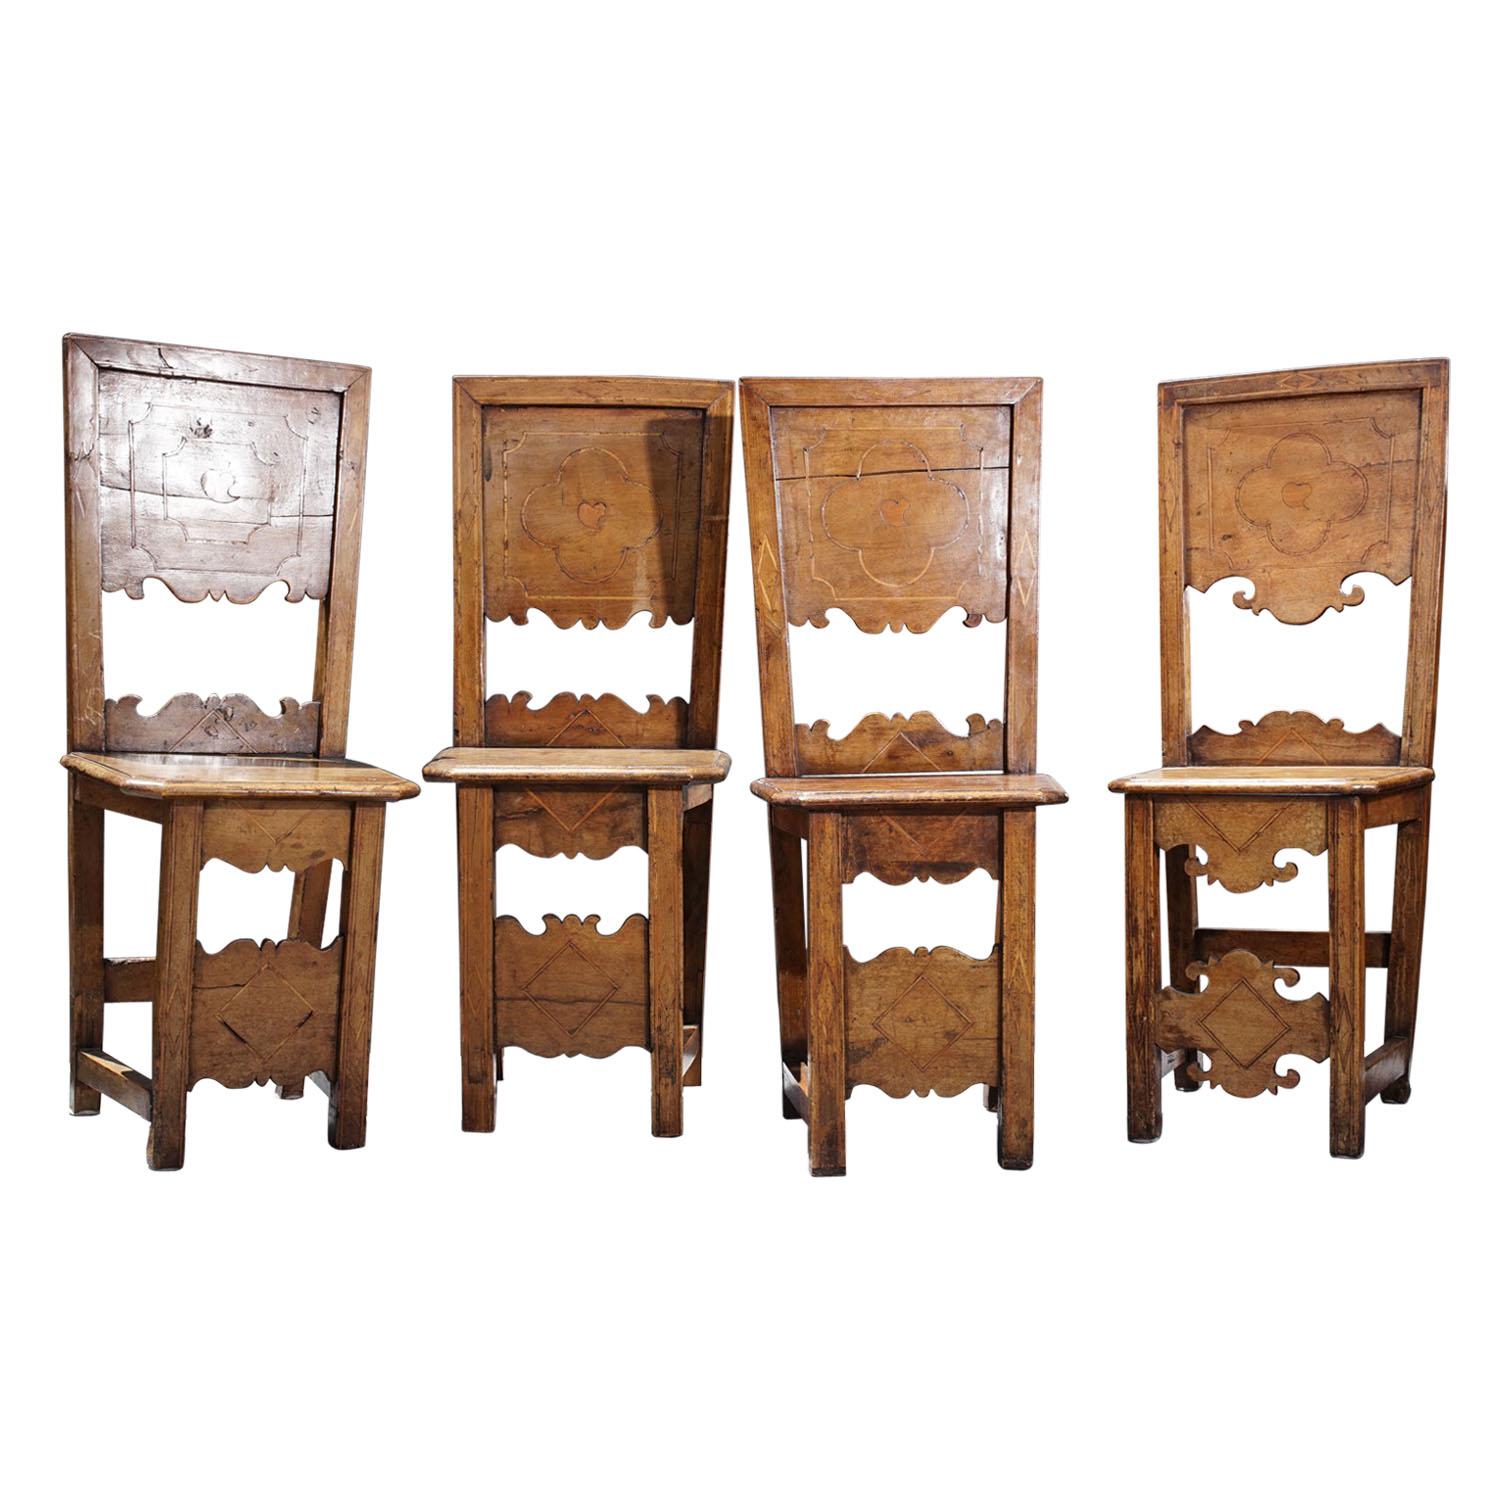 Group of Four 18th Century Inlaid Walnut Side Chairs